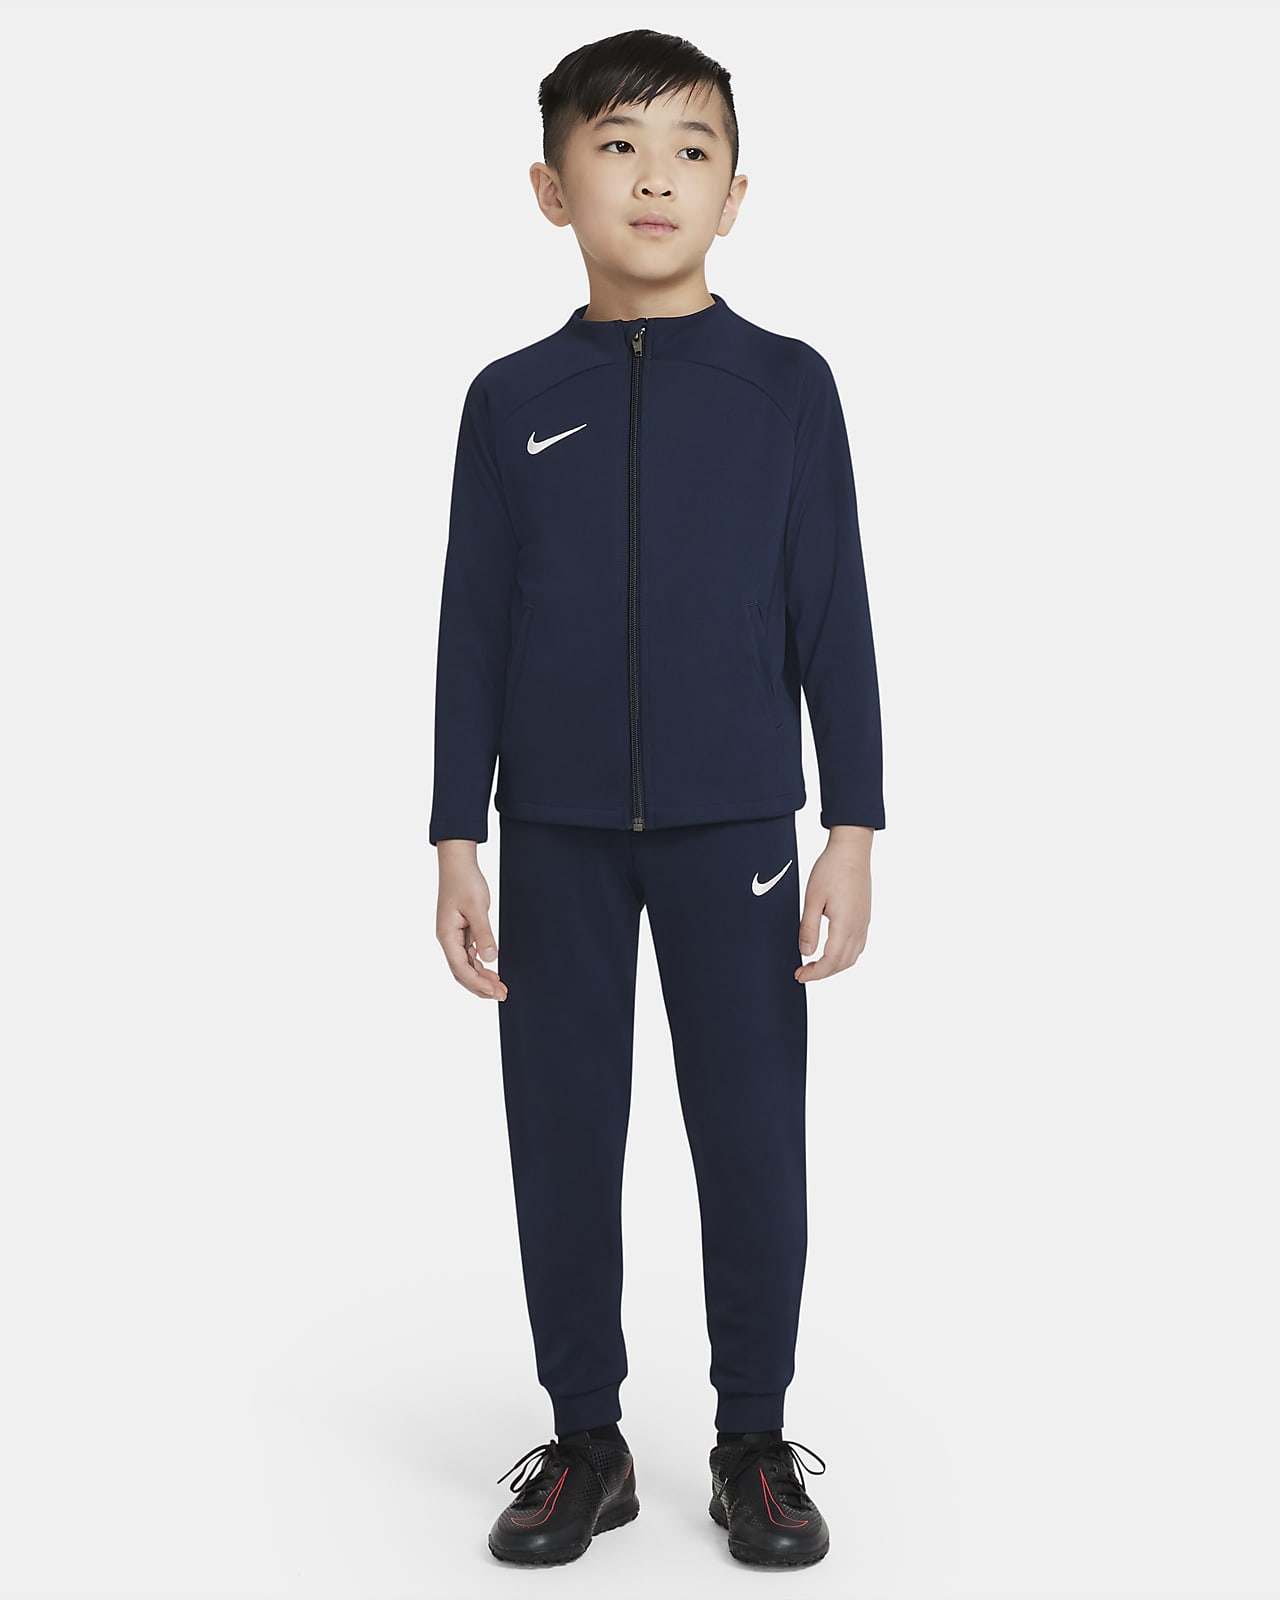 Nike Dri-FIT Academy Pro Younger Kids' Knit Football Tracksuit